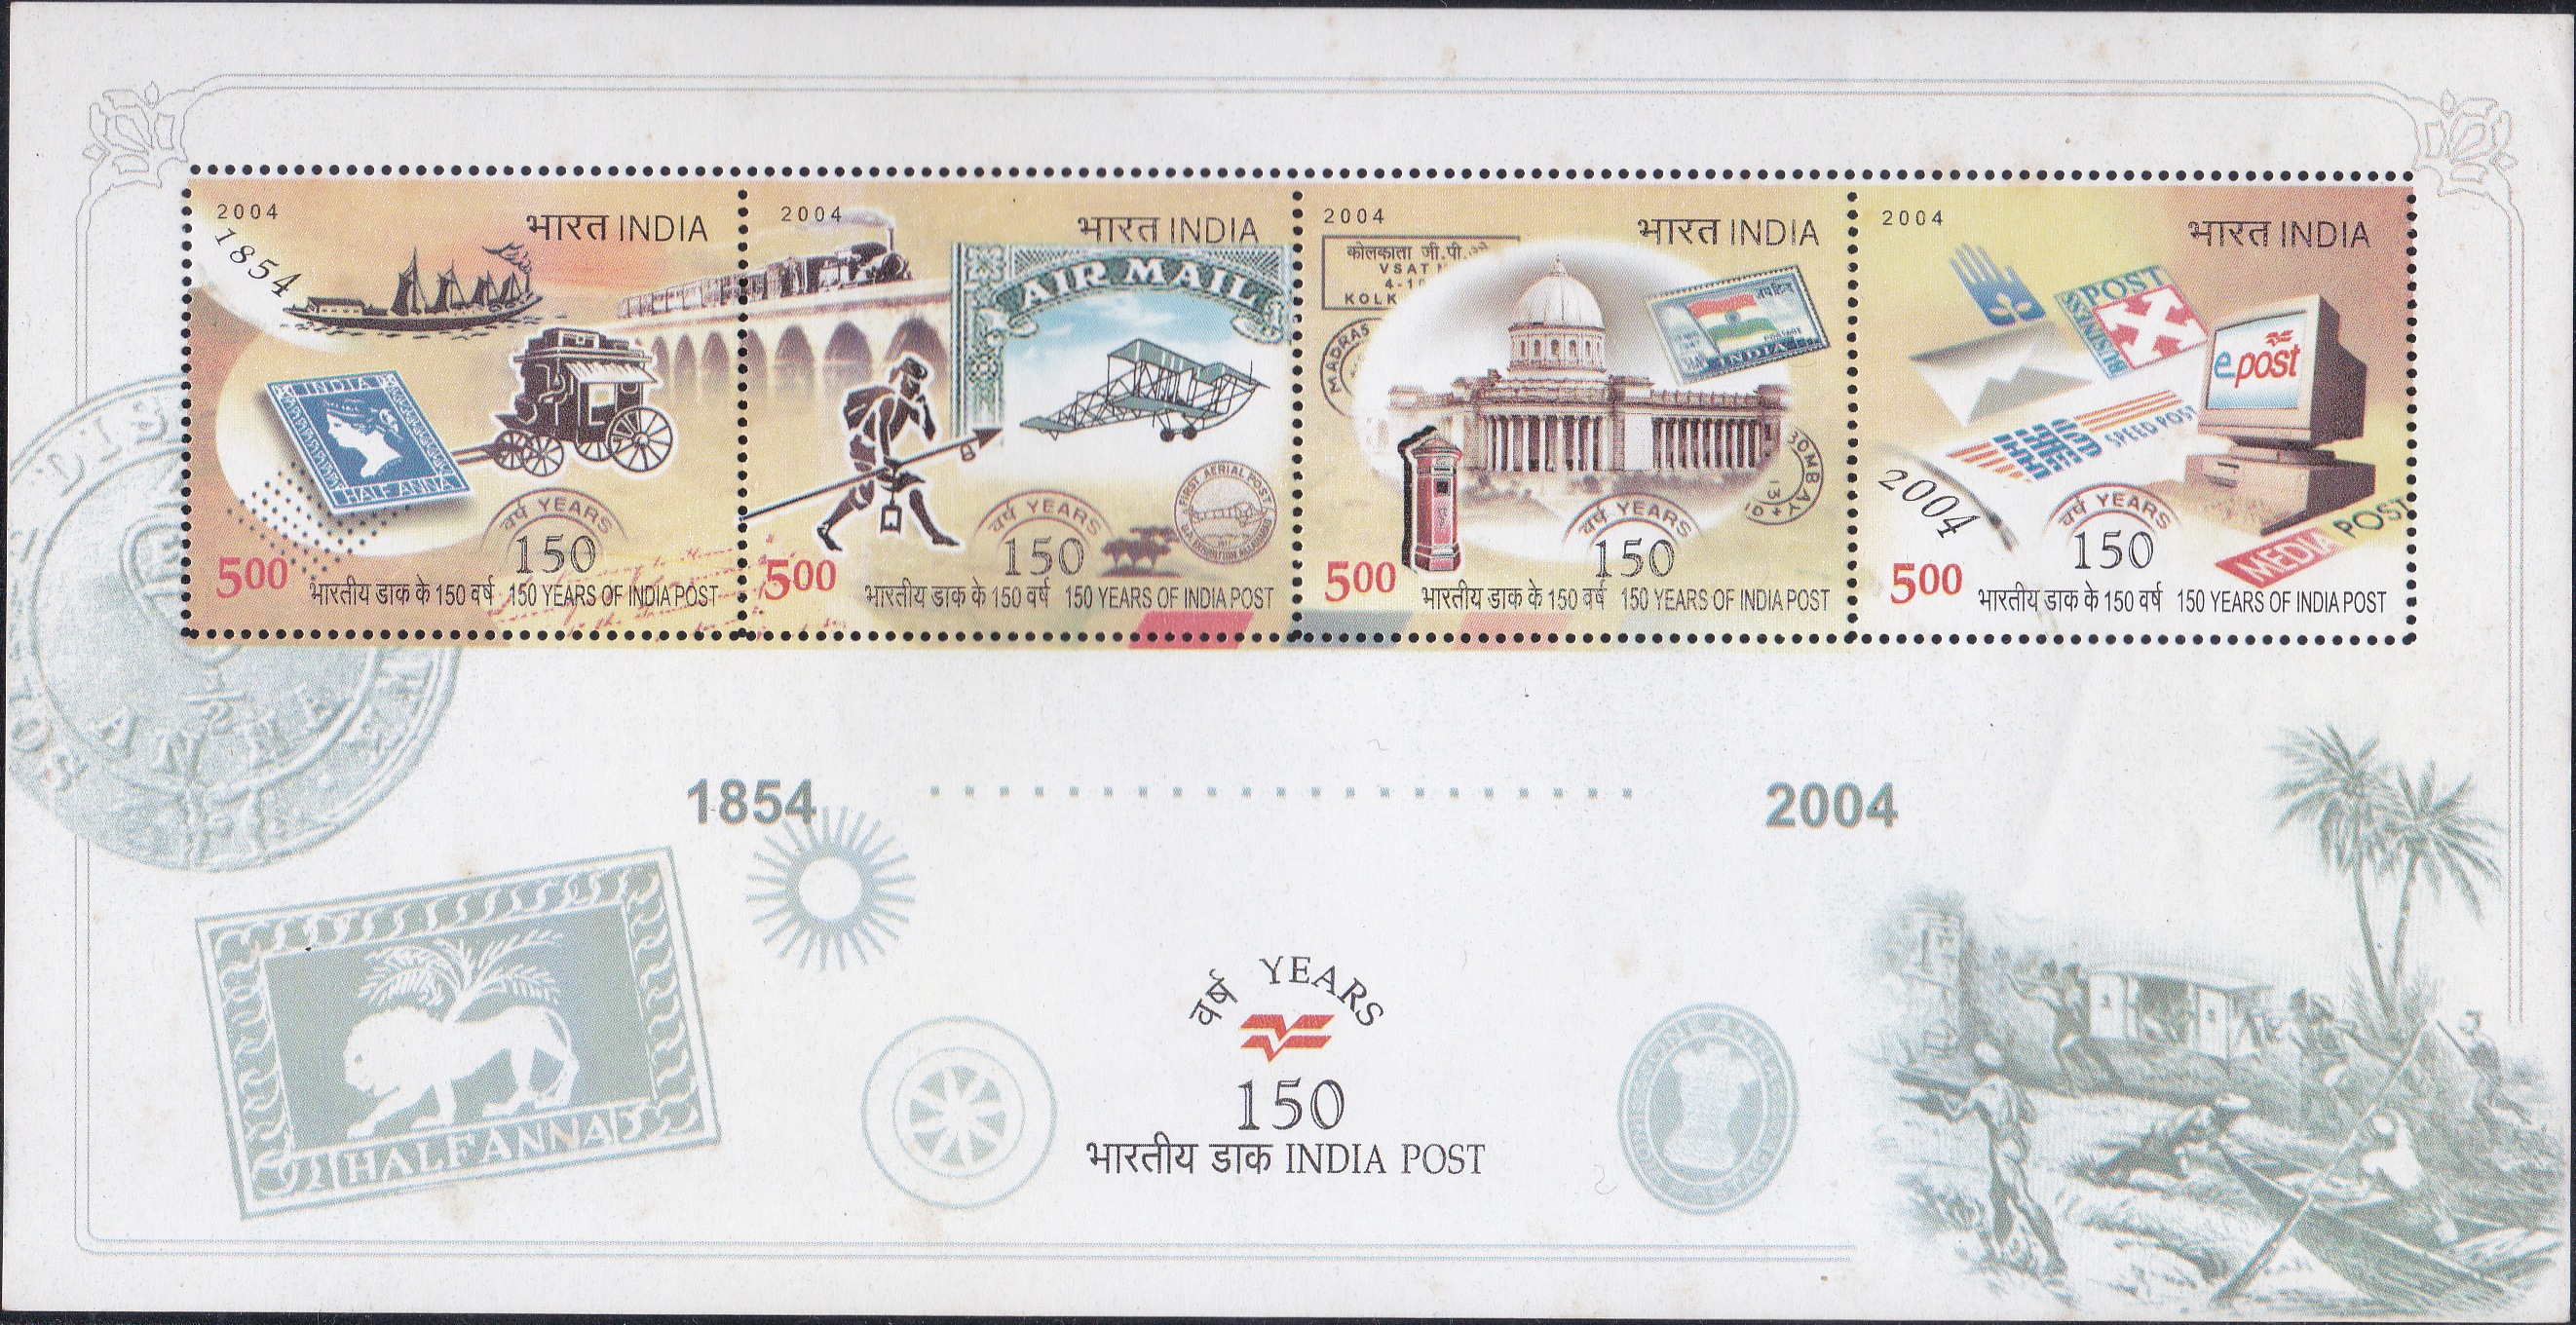  150 Years of India Post